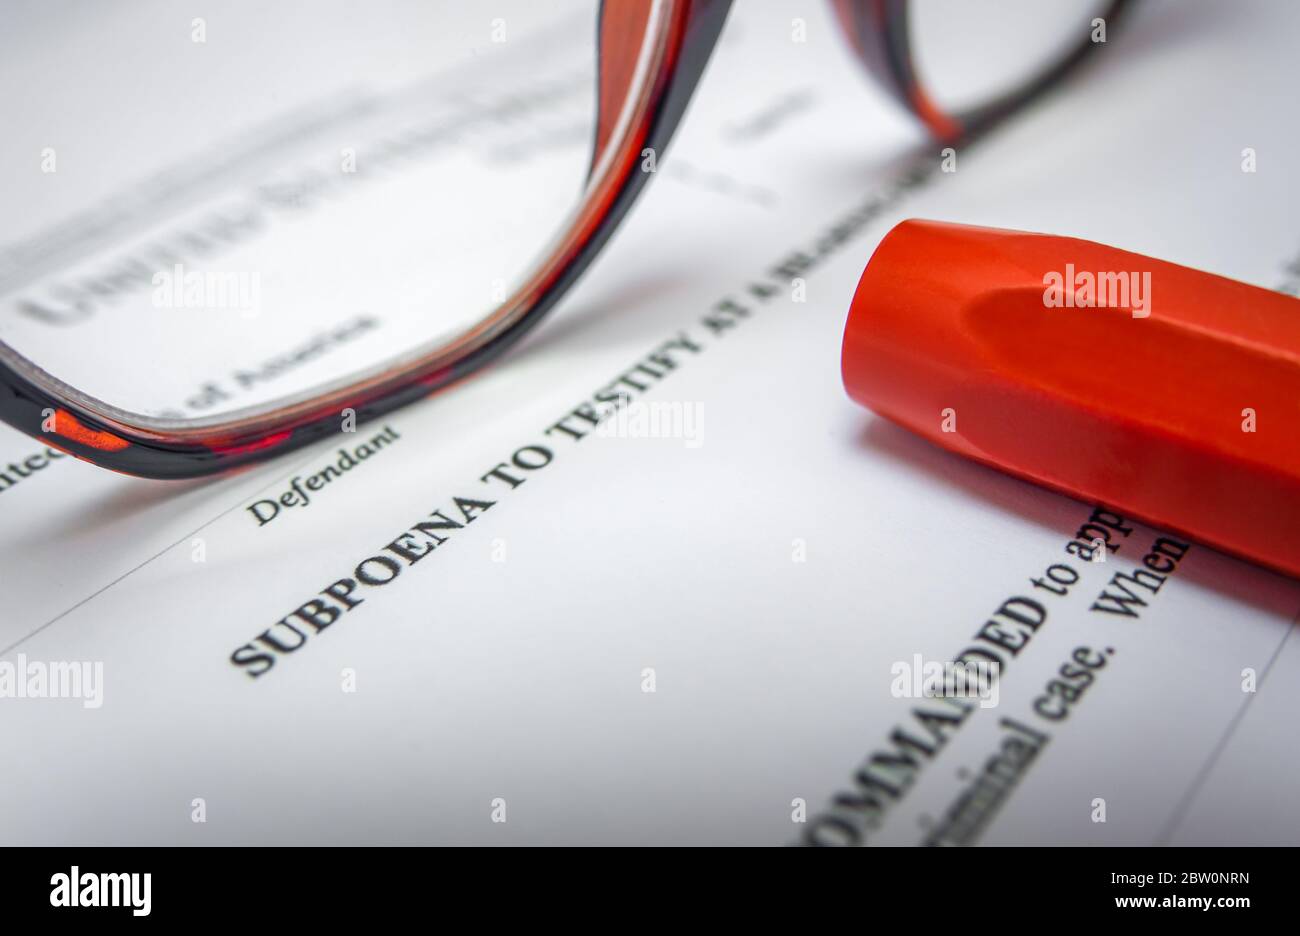 Detail Of A Subpoena For A Criminal Court Case With Glasses And A Pen Stock Photo